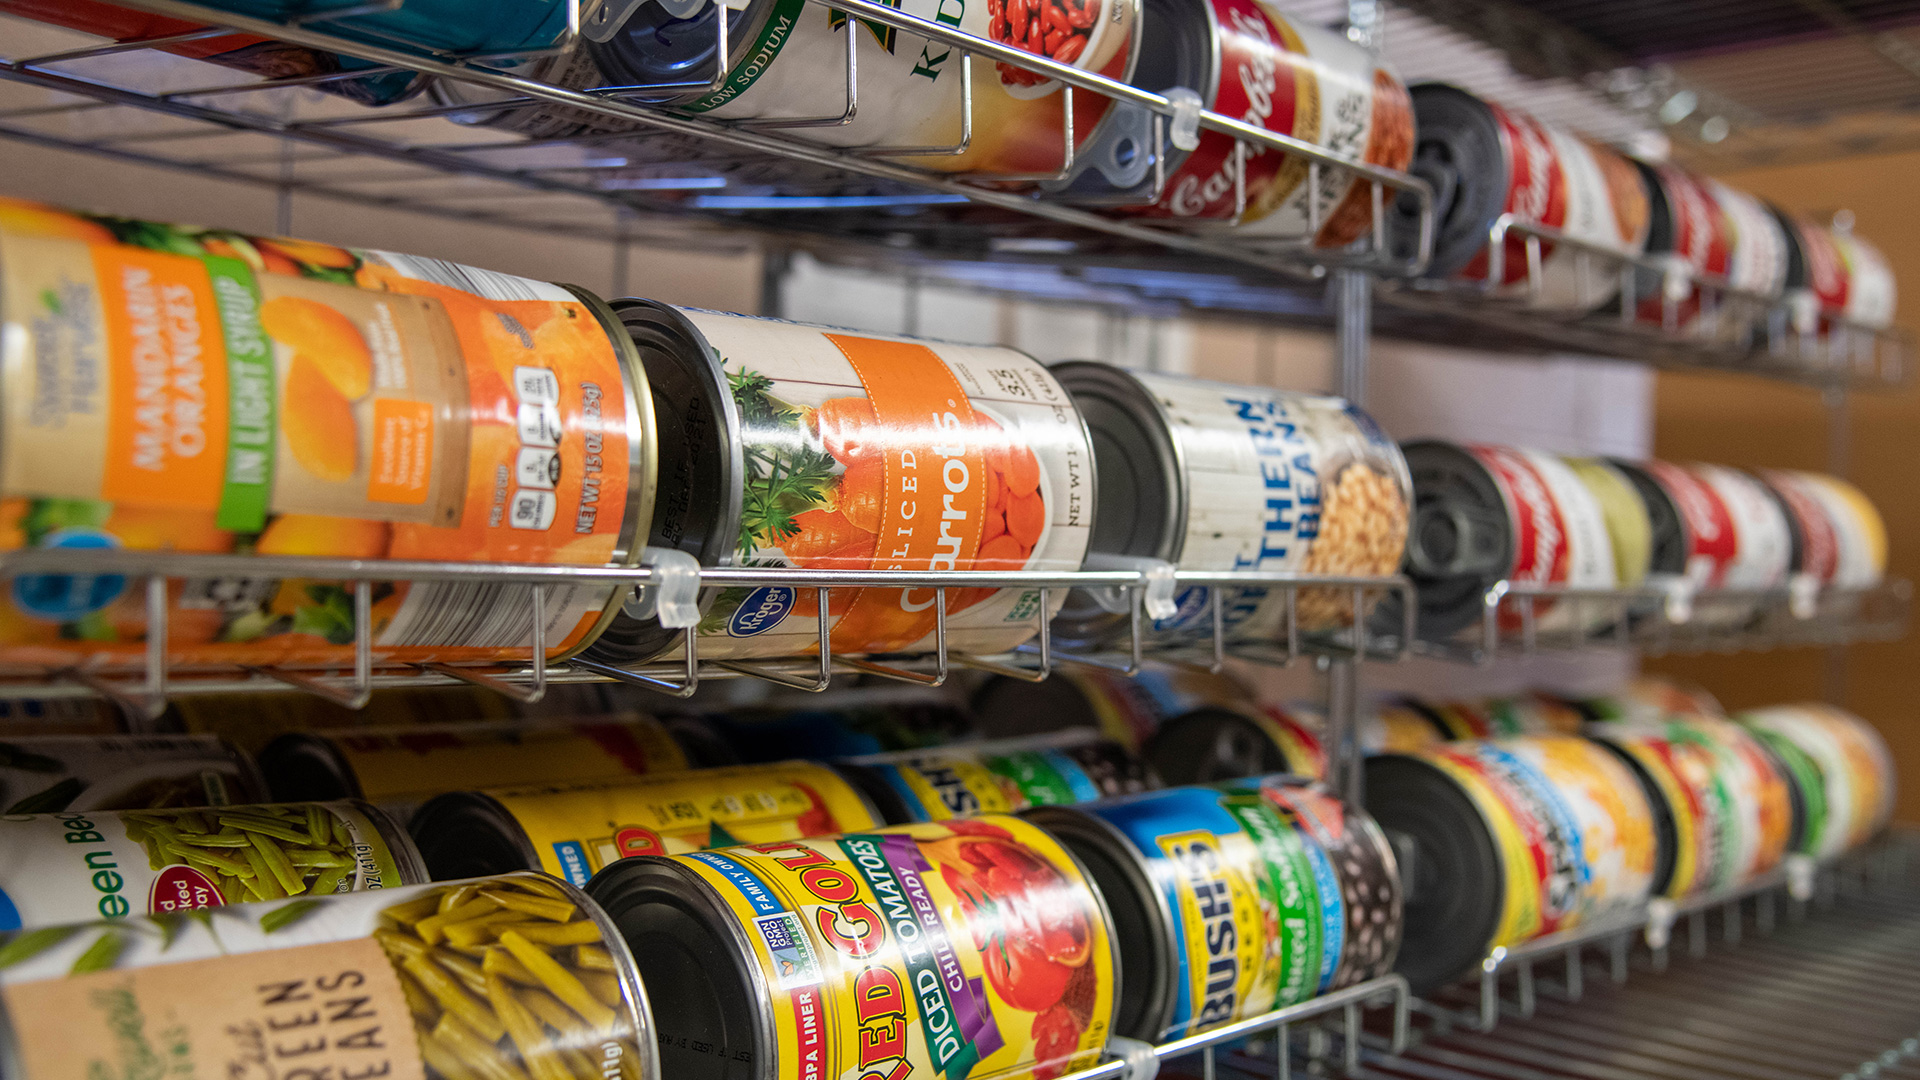 Stocked items at the ACE campus food pantry